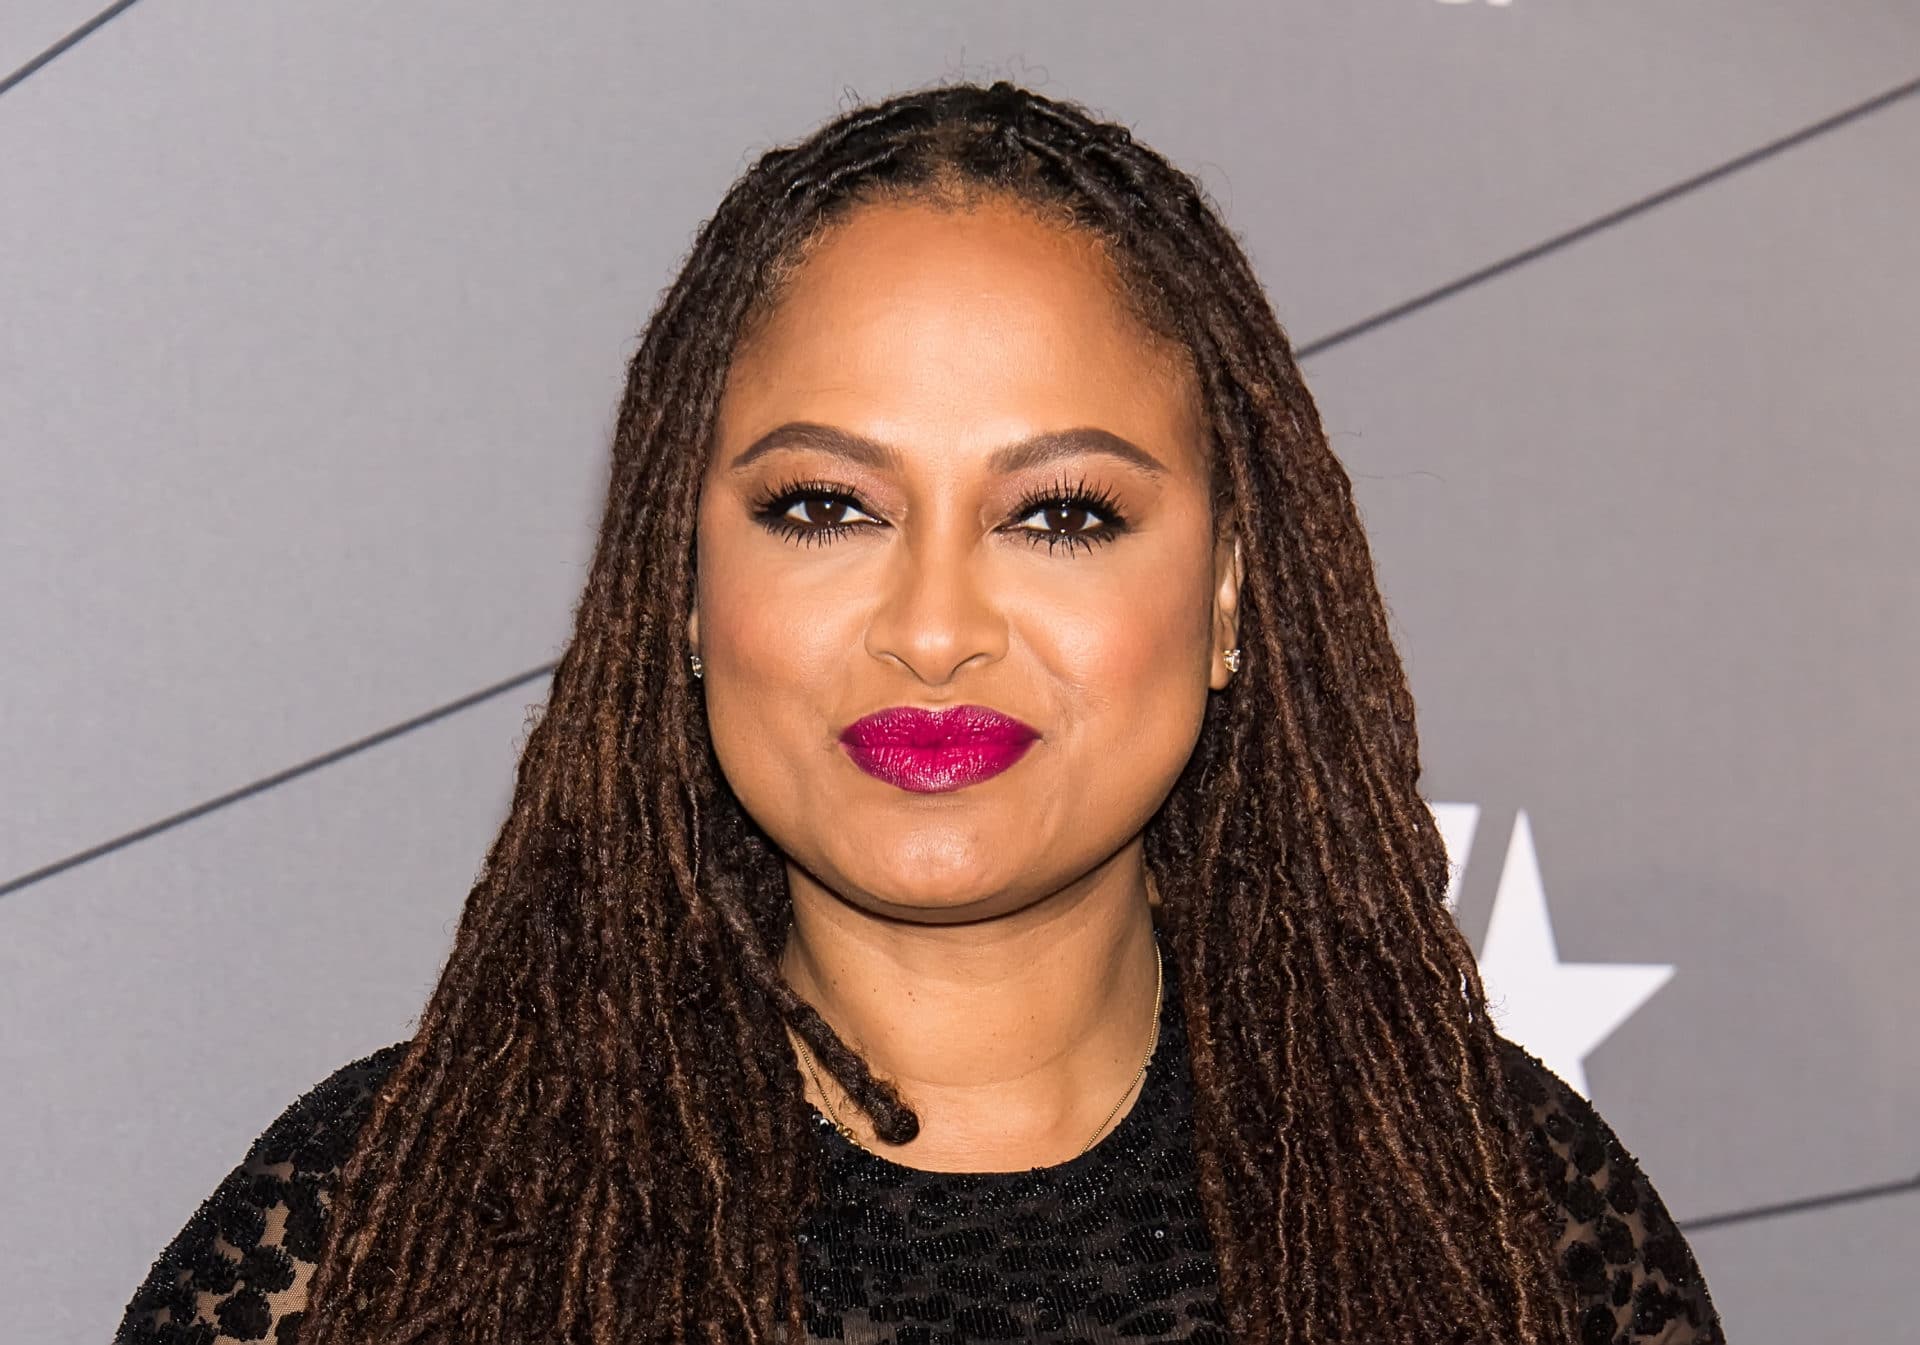 Ava DuVernay Will Host 'Day Of Racial Healing' To Promote Dialogue